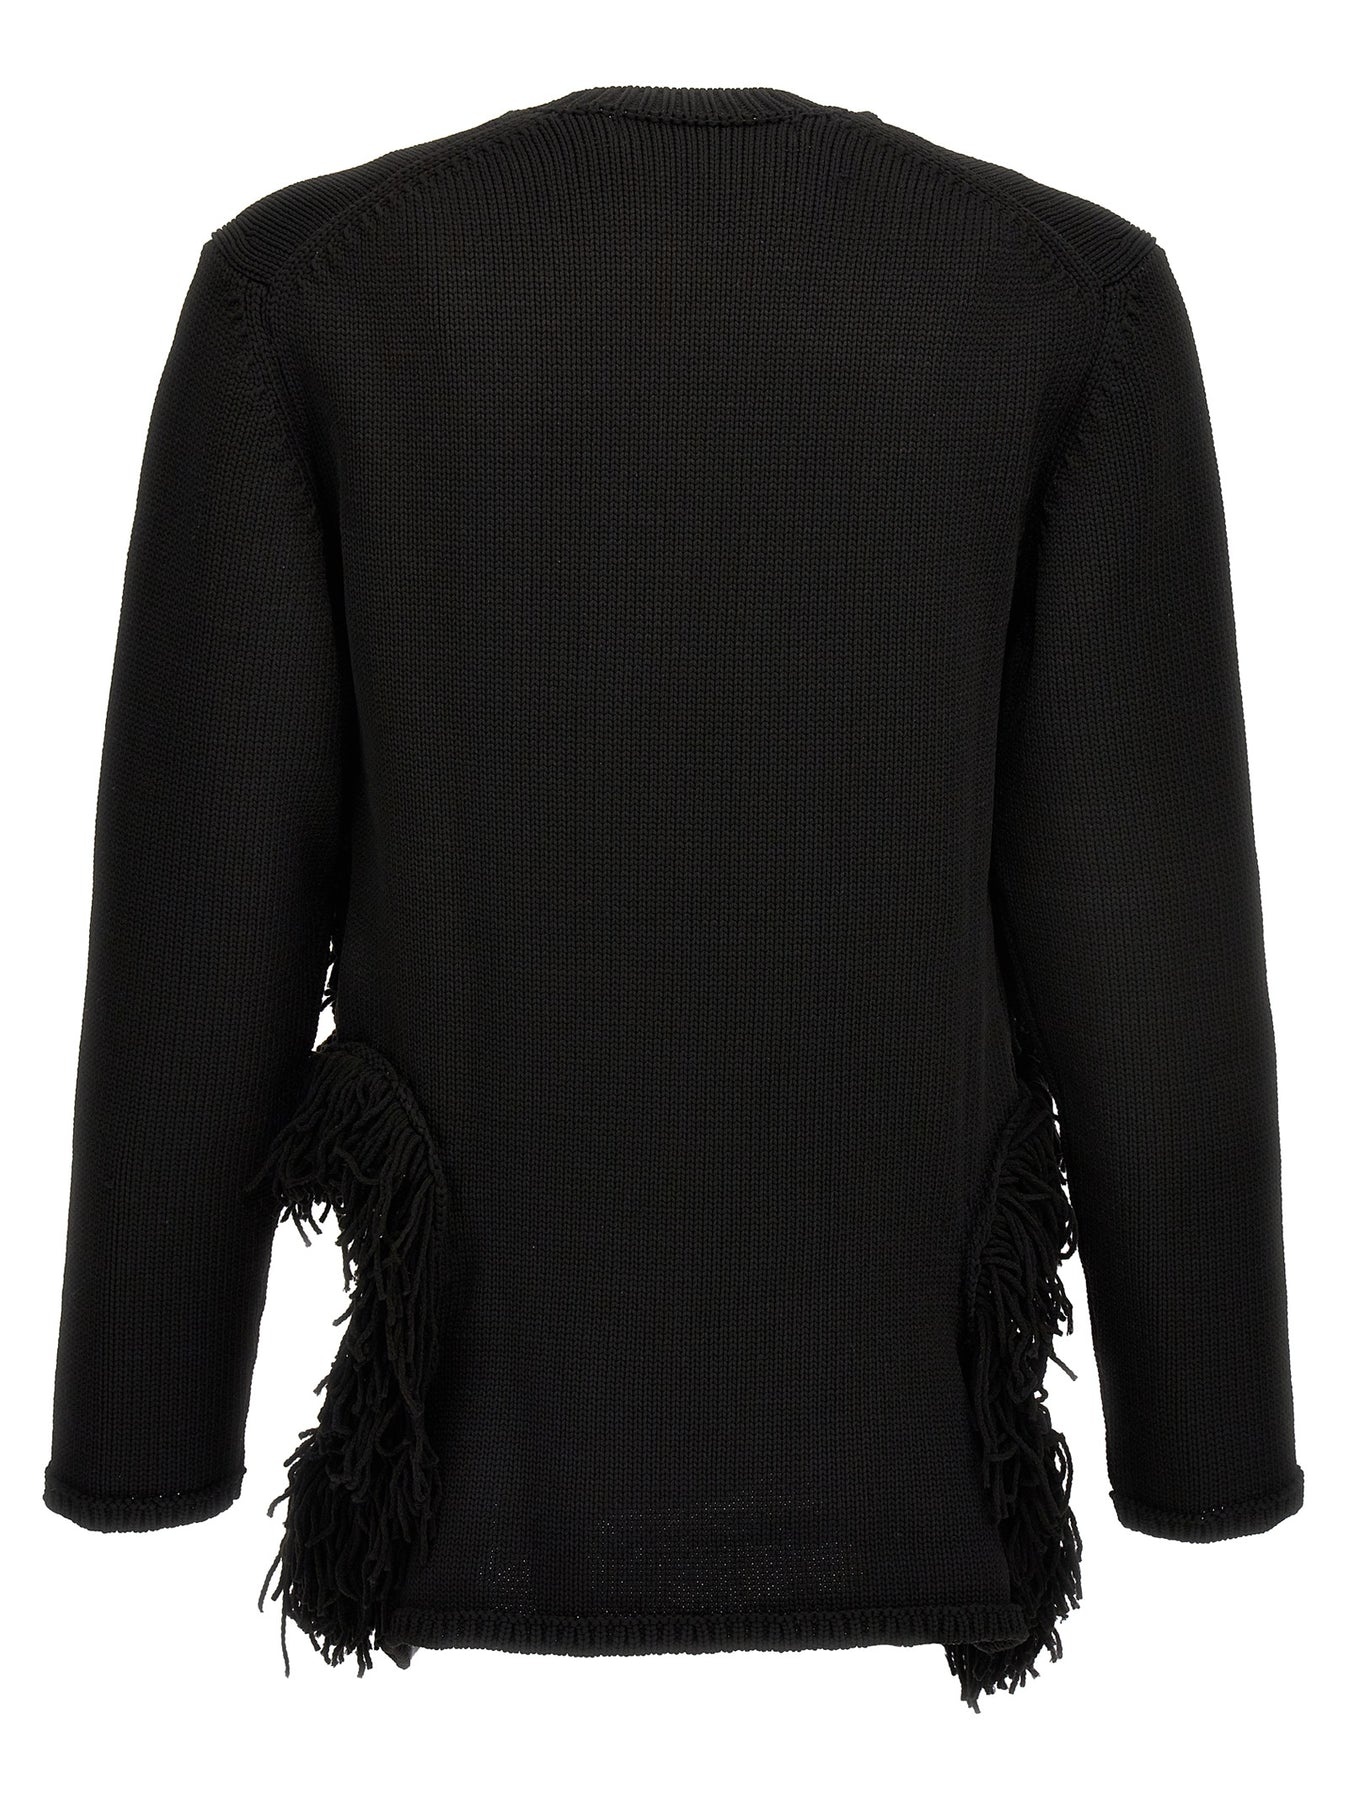 Cut-Out And Fringed Sweater Sweater, Cardigans Black - 2